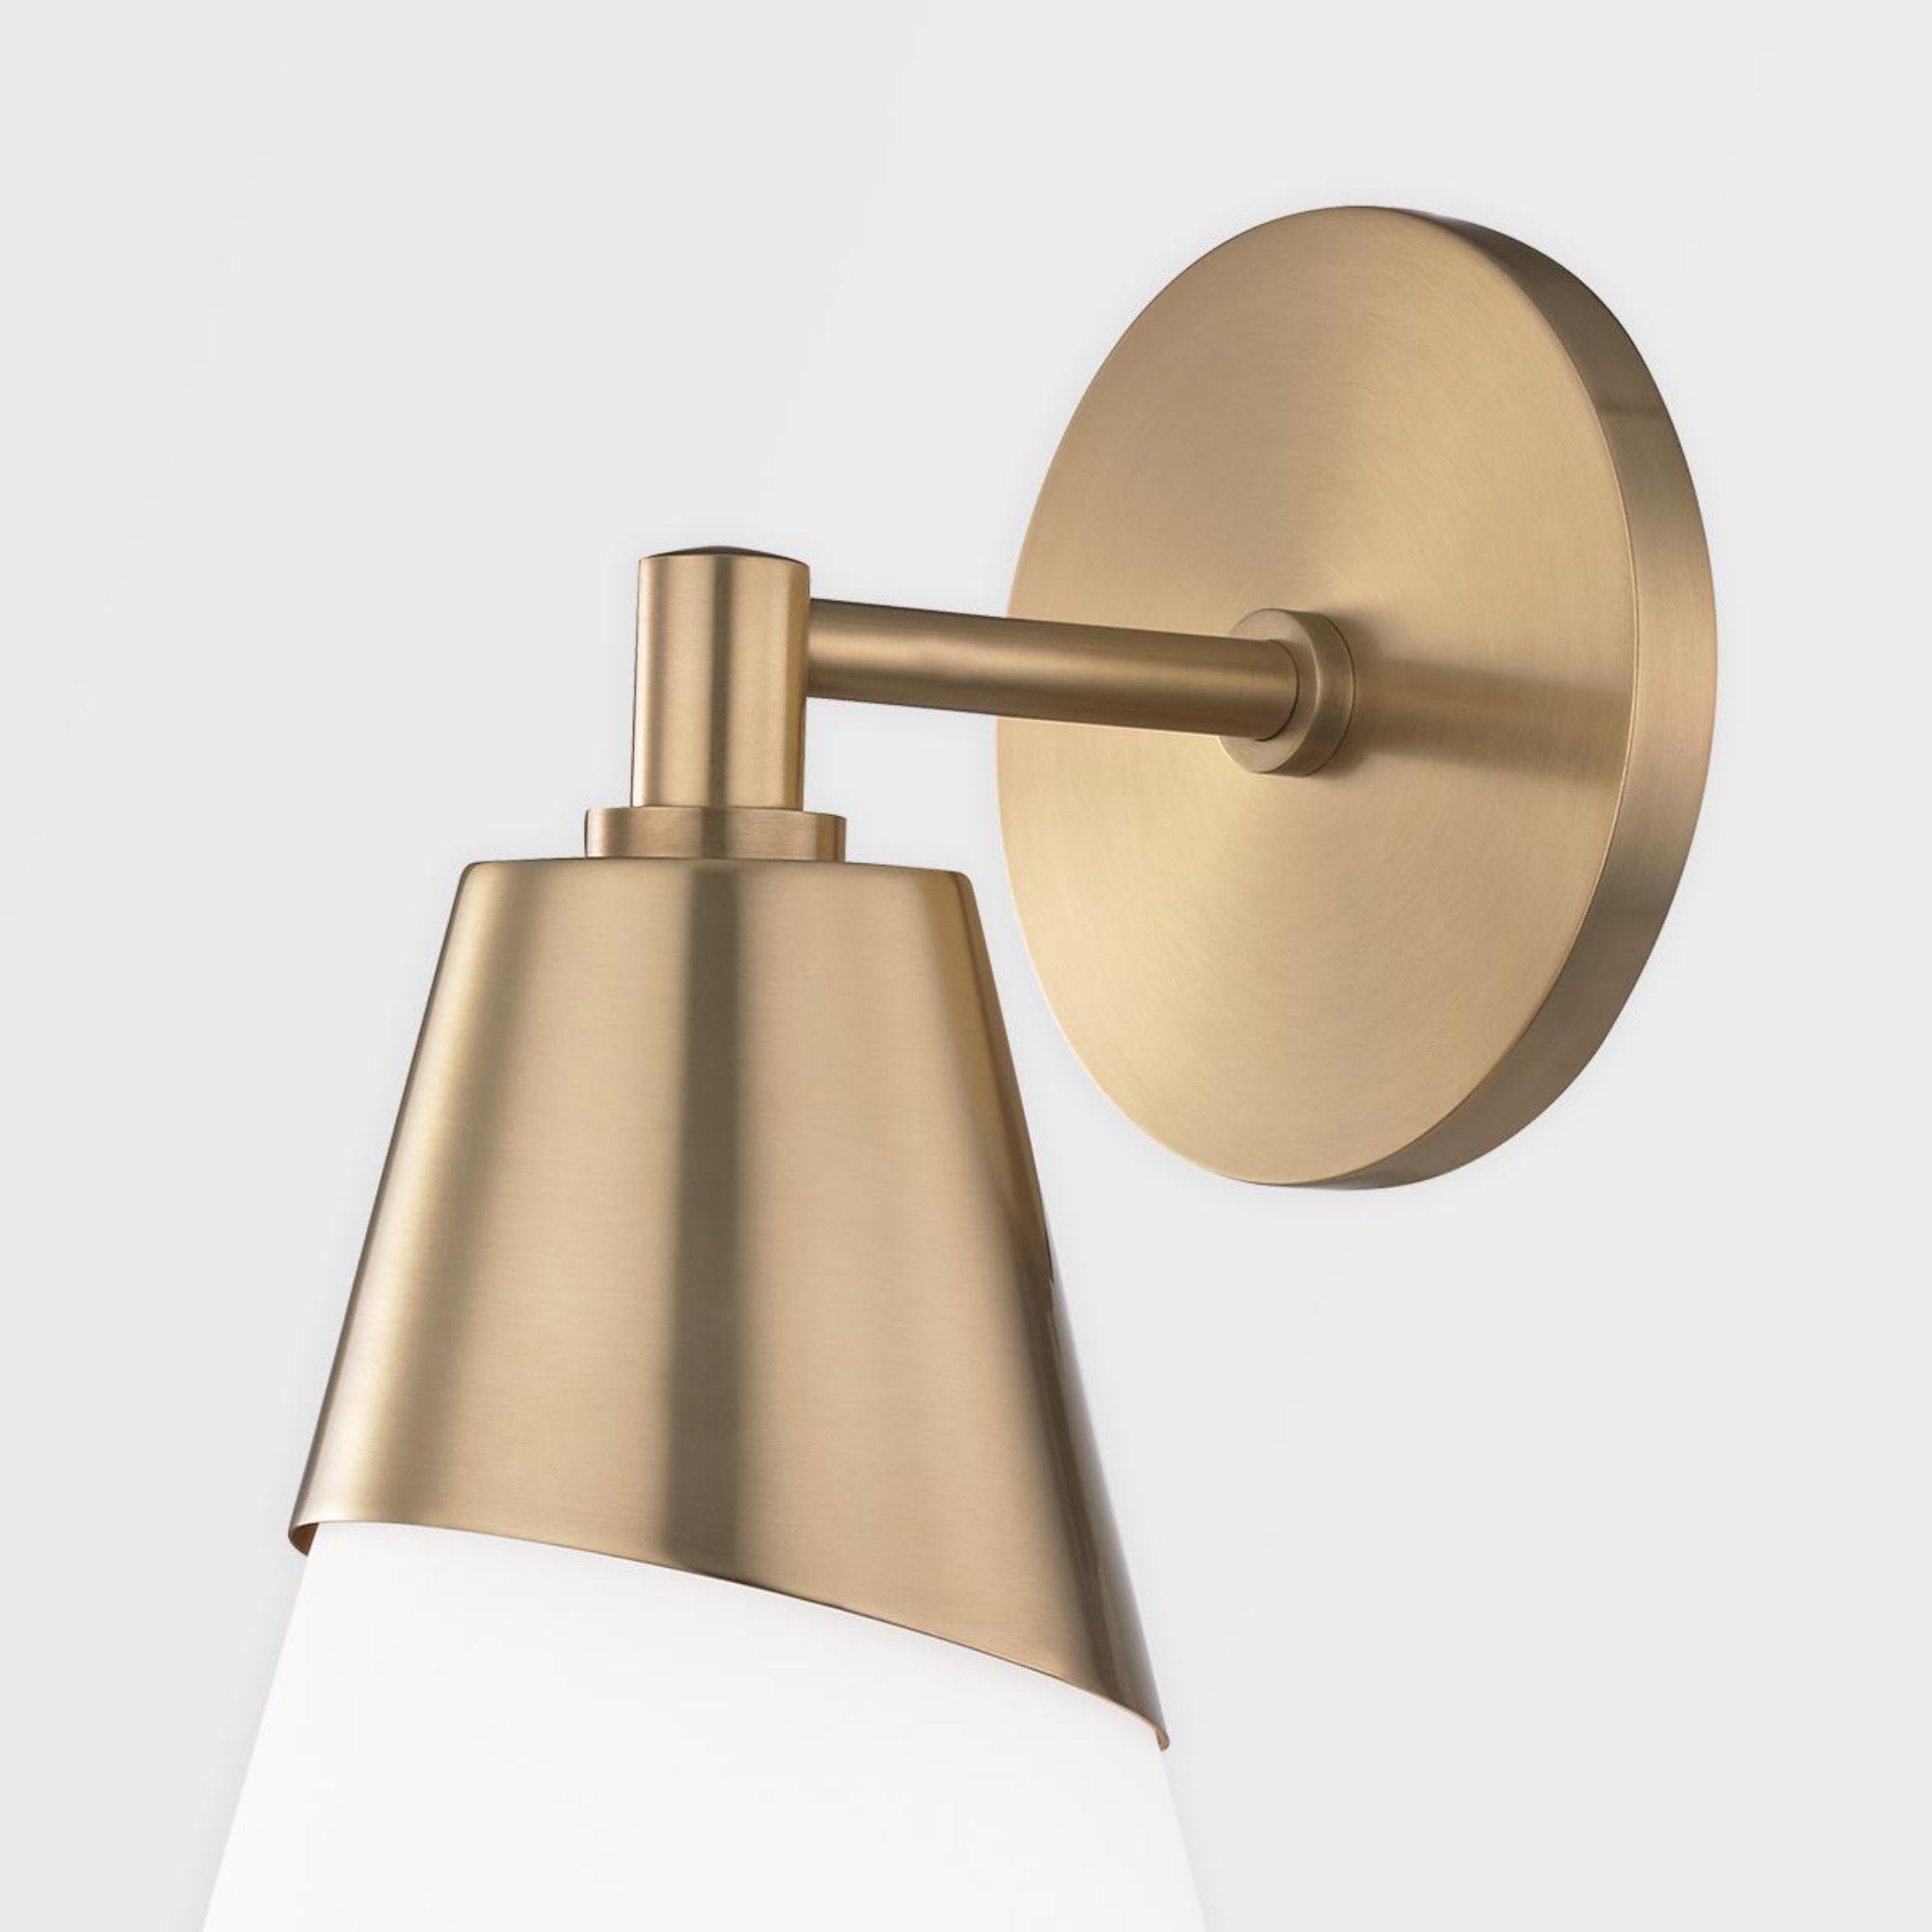 Cora 1-Light Wall Sconce in Aged Brass